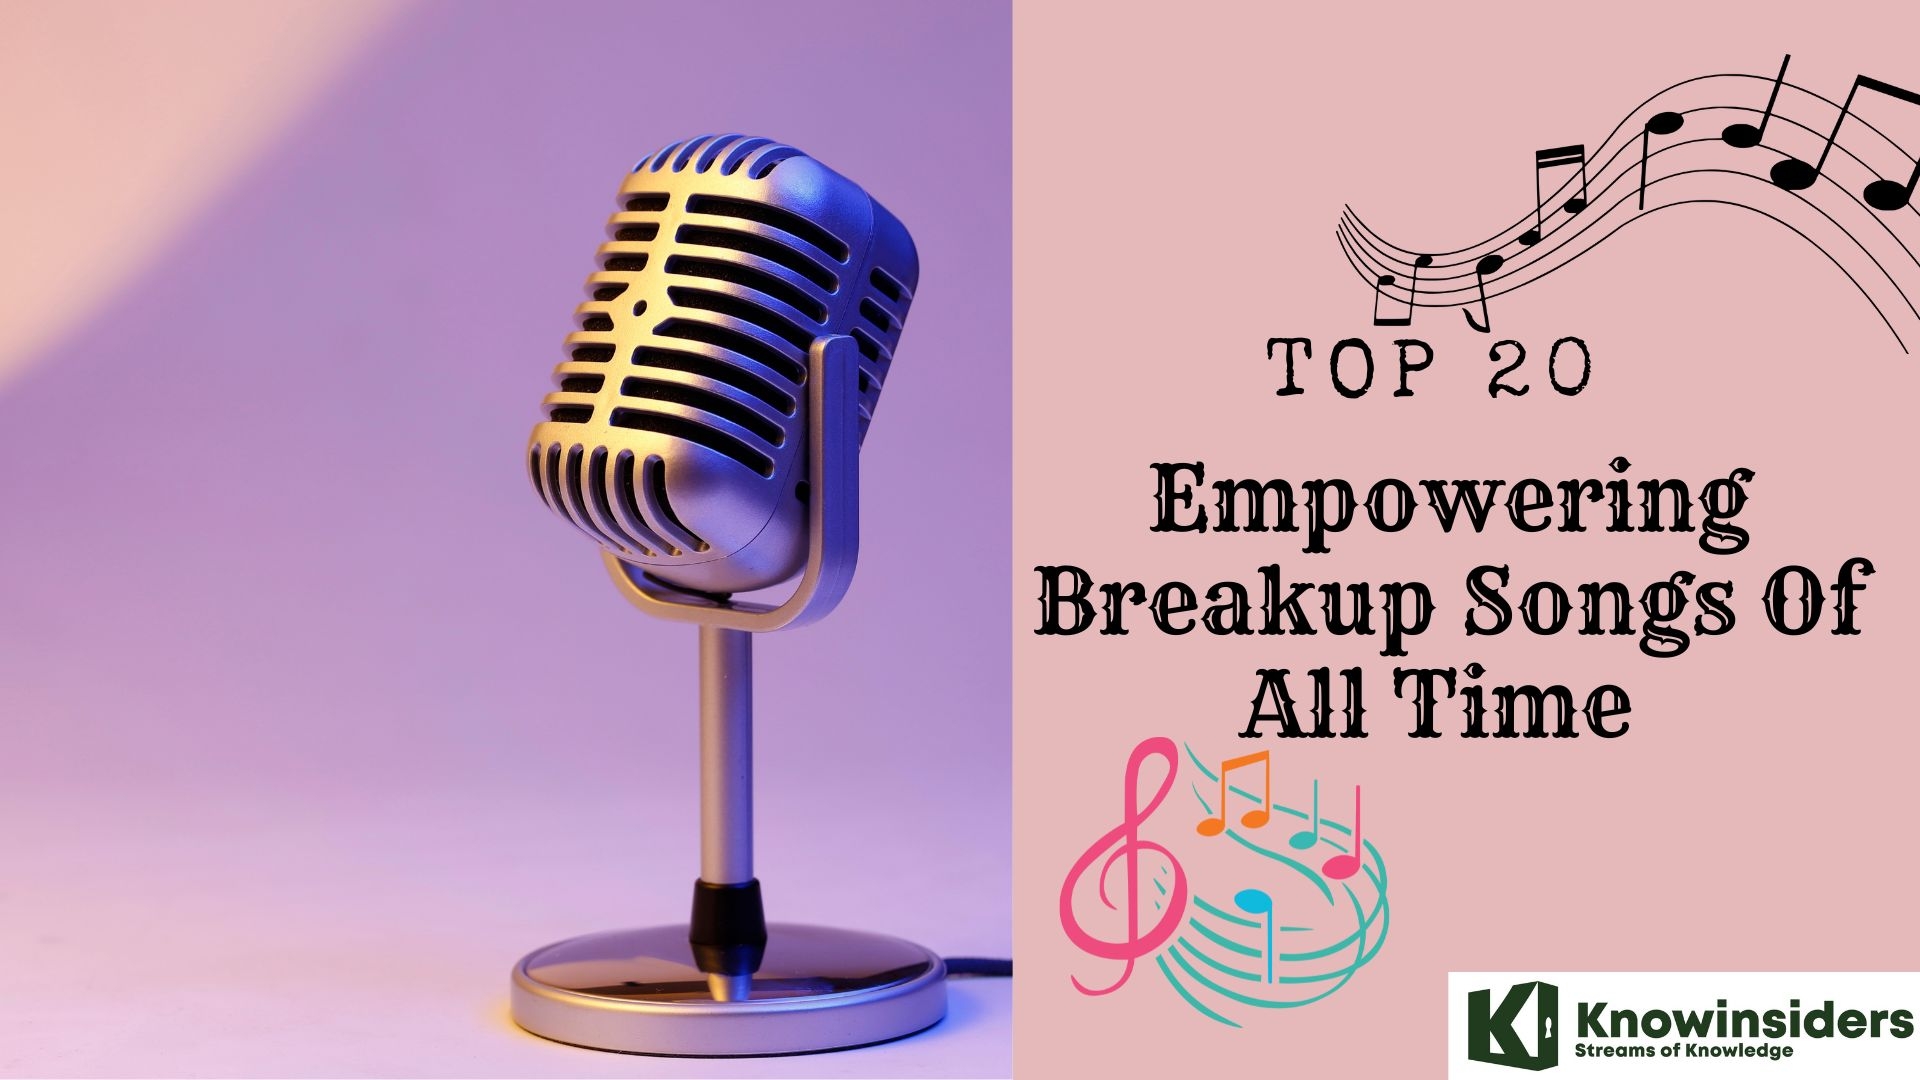 Top 20 Empowering Breakup Songs Of All Time